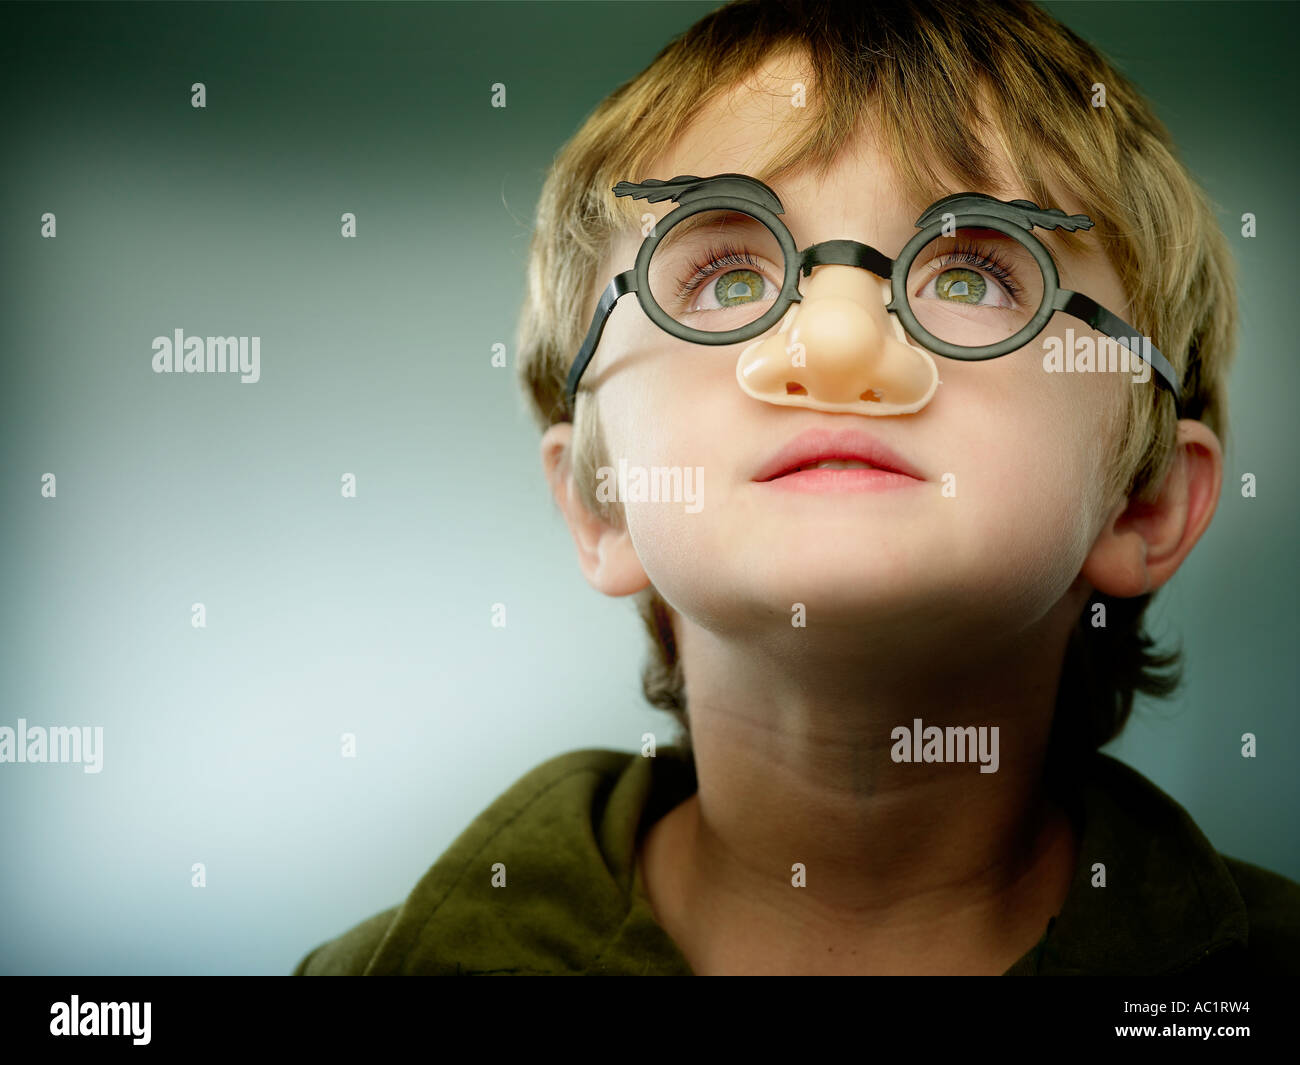 Closeup Of A Fake Nose And Glasses With Furry Eyebrows Stock Photo